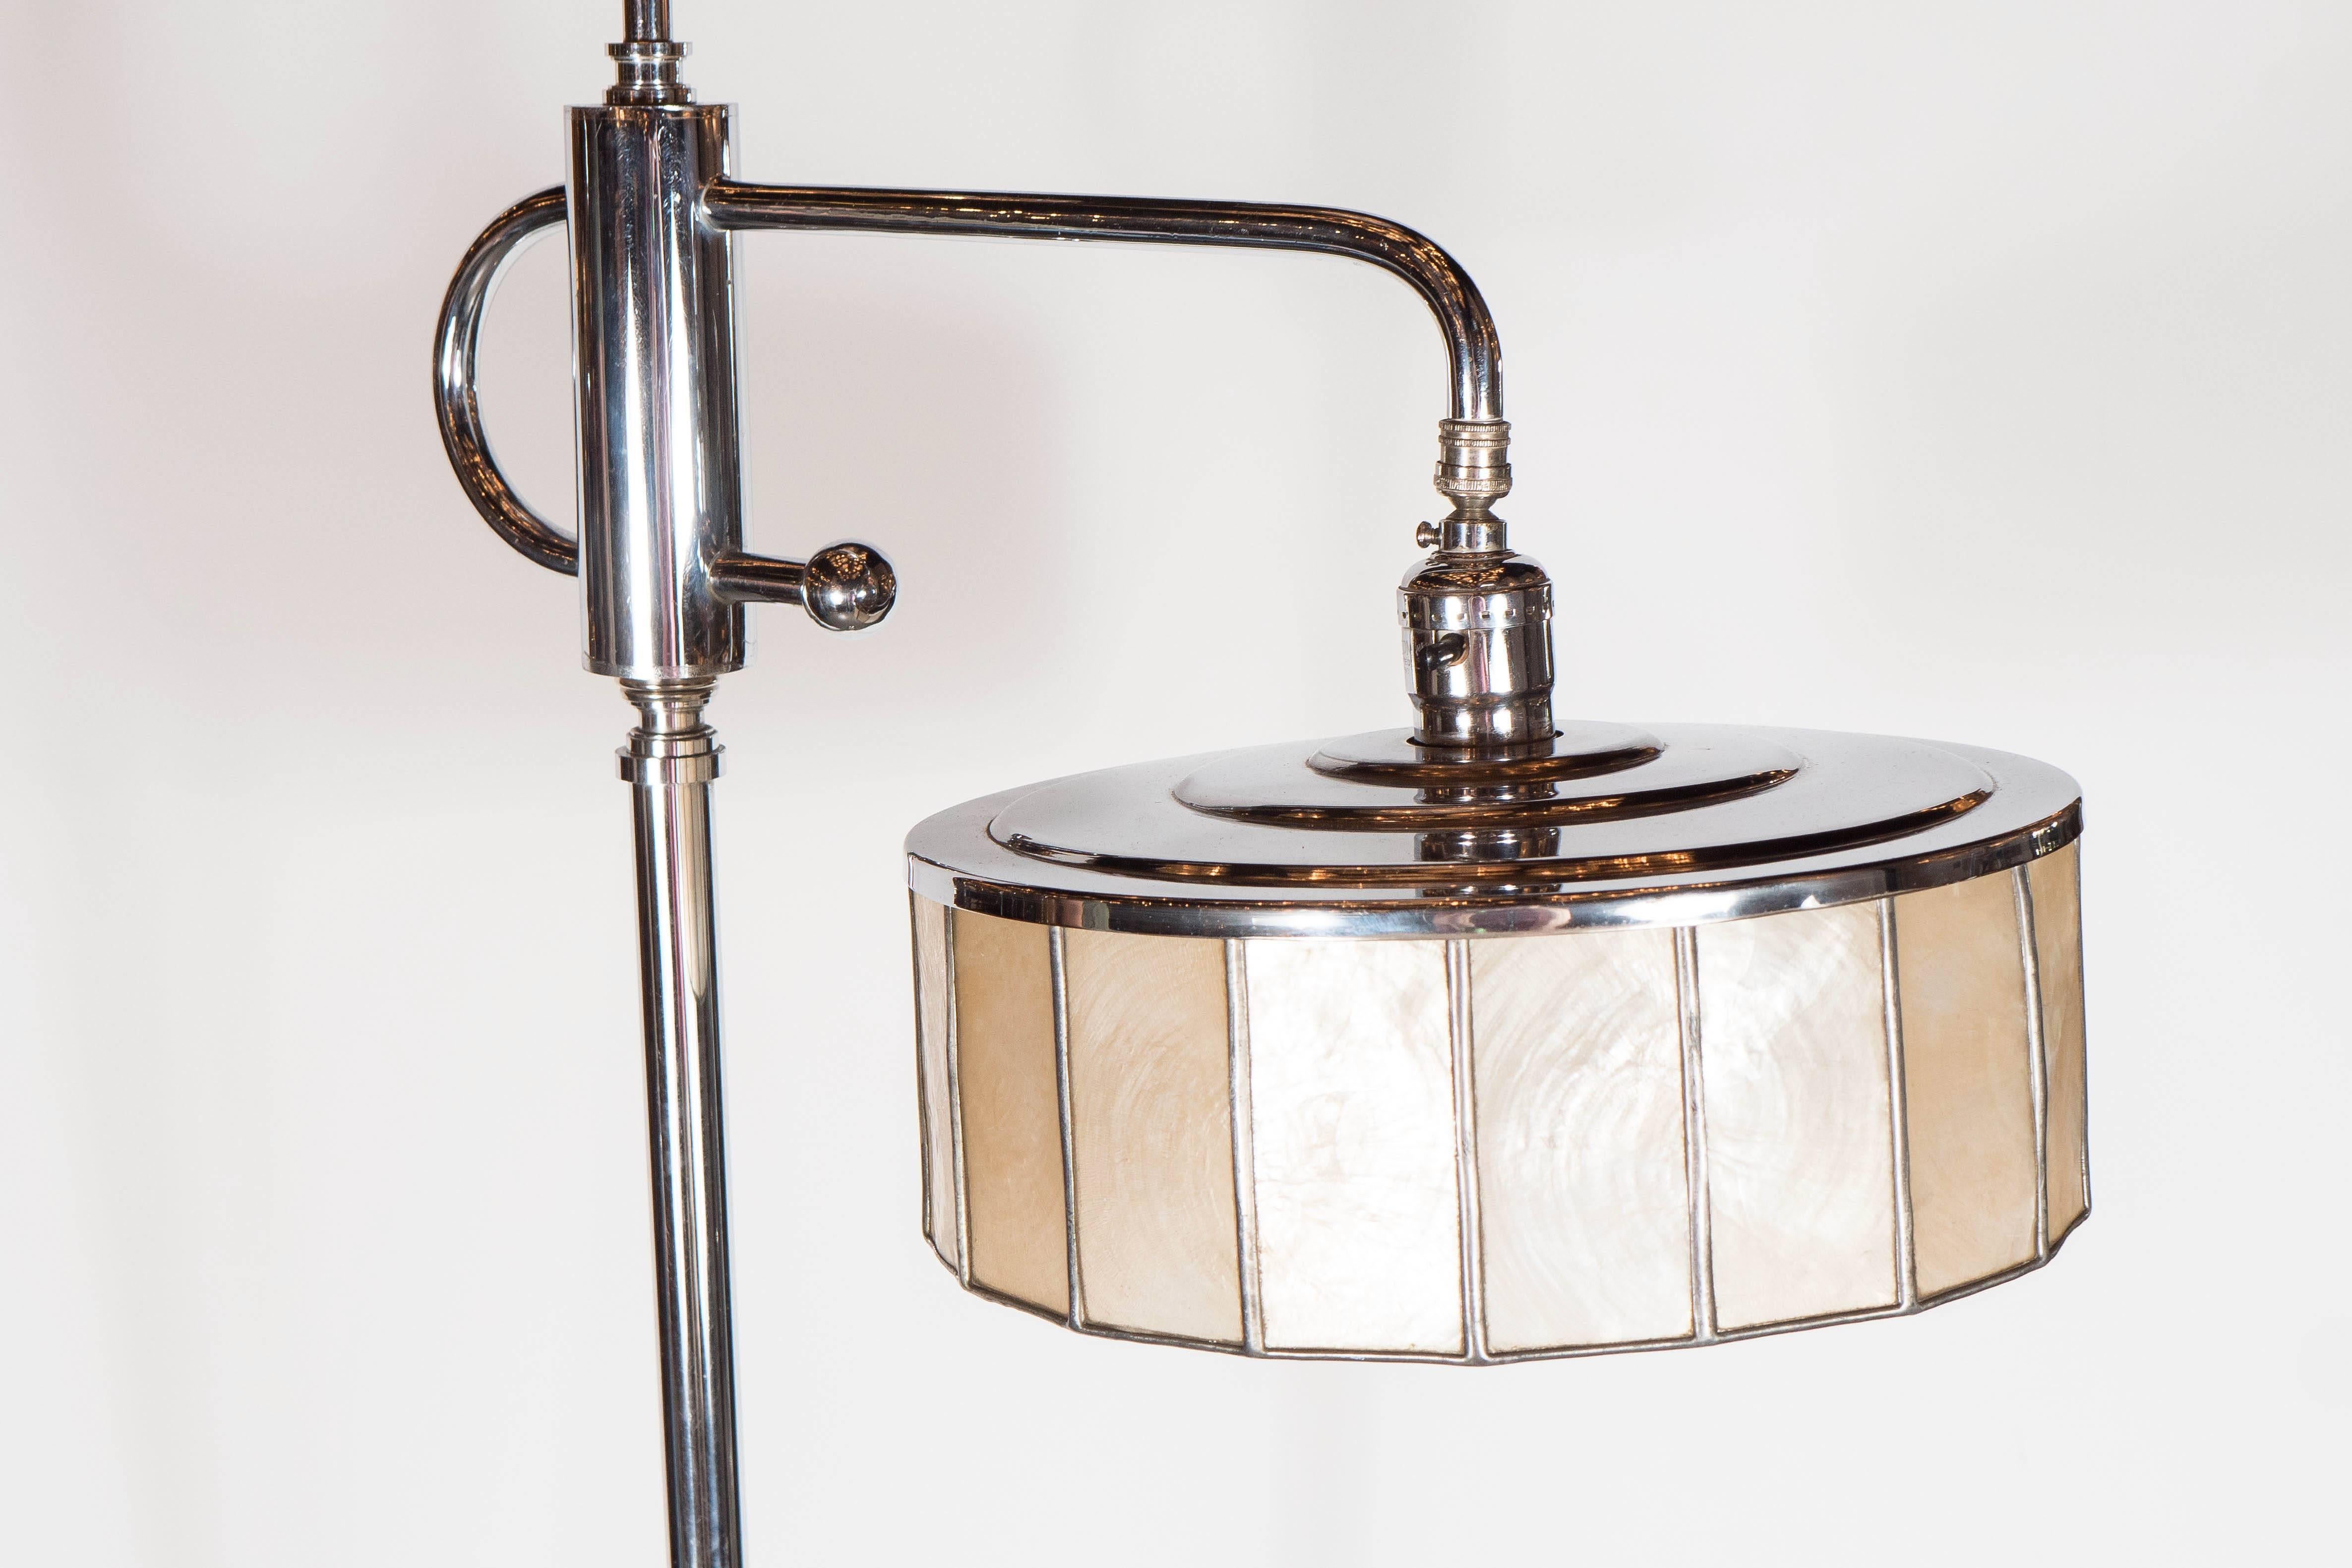 Mid-20th Century Art Deco Skyscraper Style Adjustable Floor Lamp with Shell Detailing